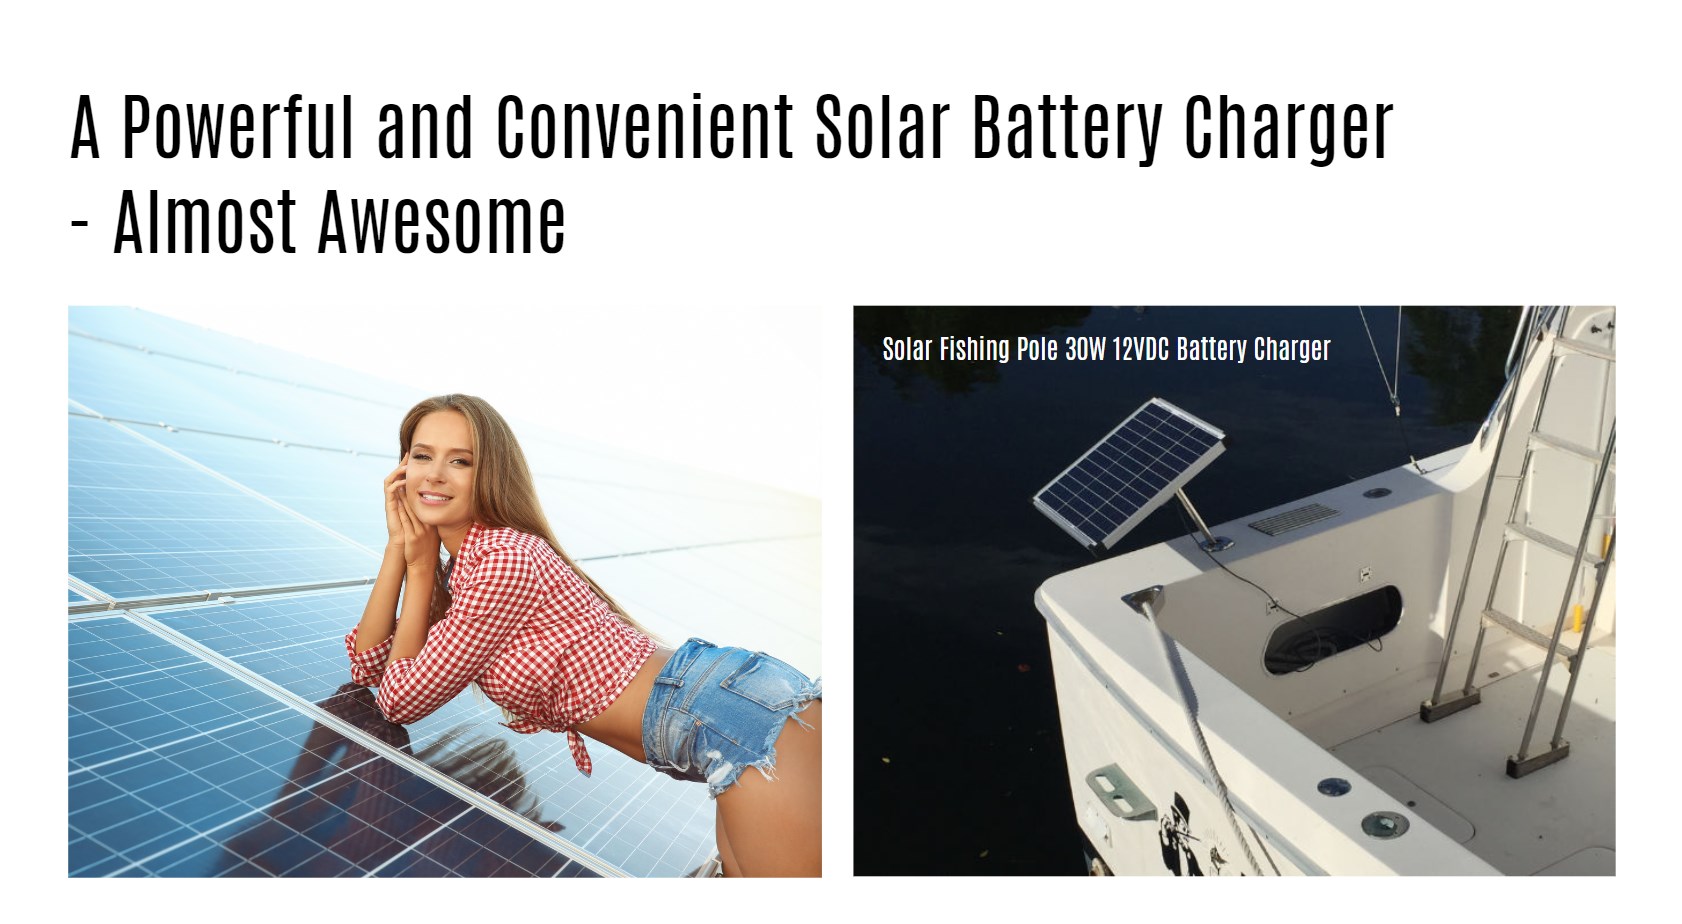 A Powerful and Convenient Solar Battery Charger, Solar Fishing Pole 30W 12VDC Battery Charger